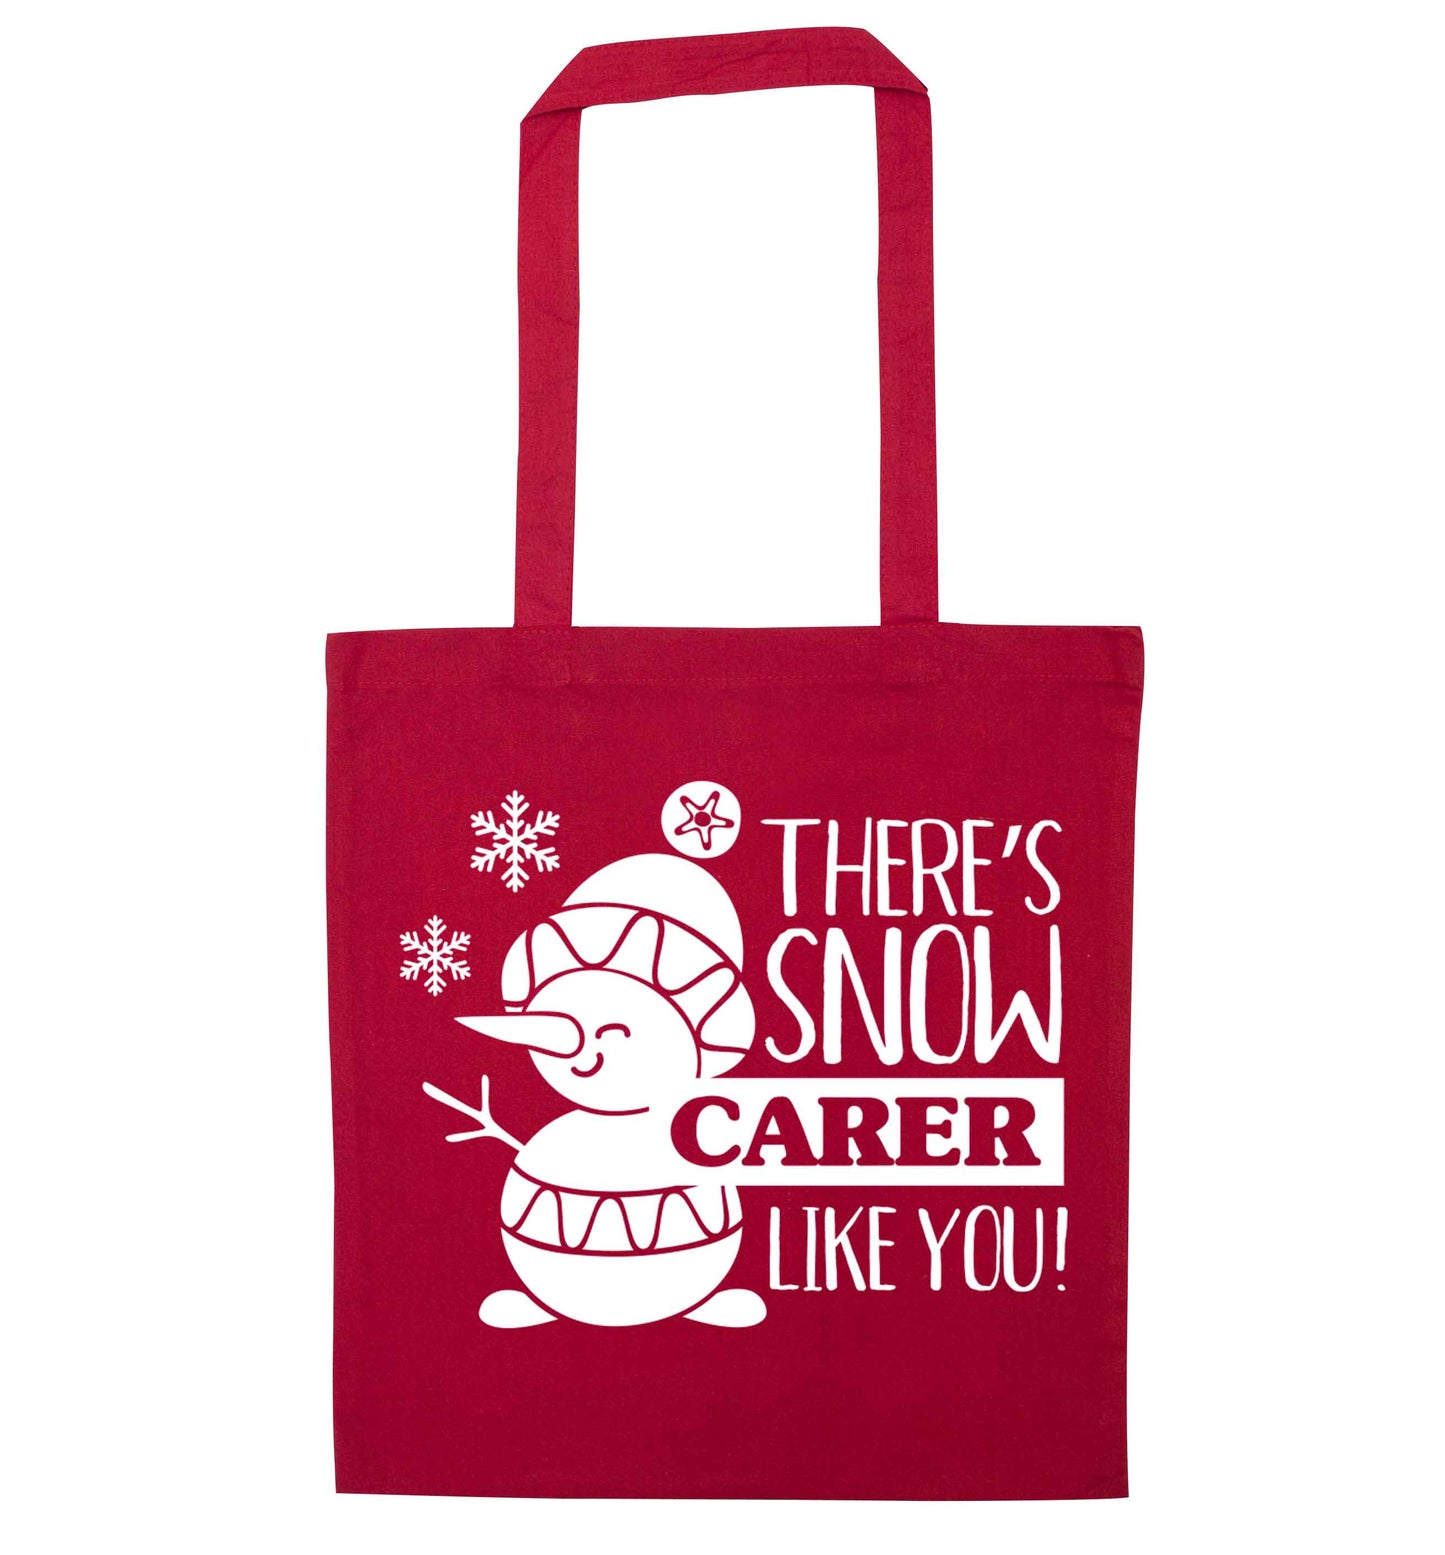 There's snow carer like you red tote bag